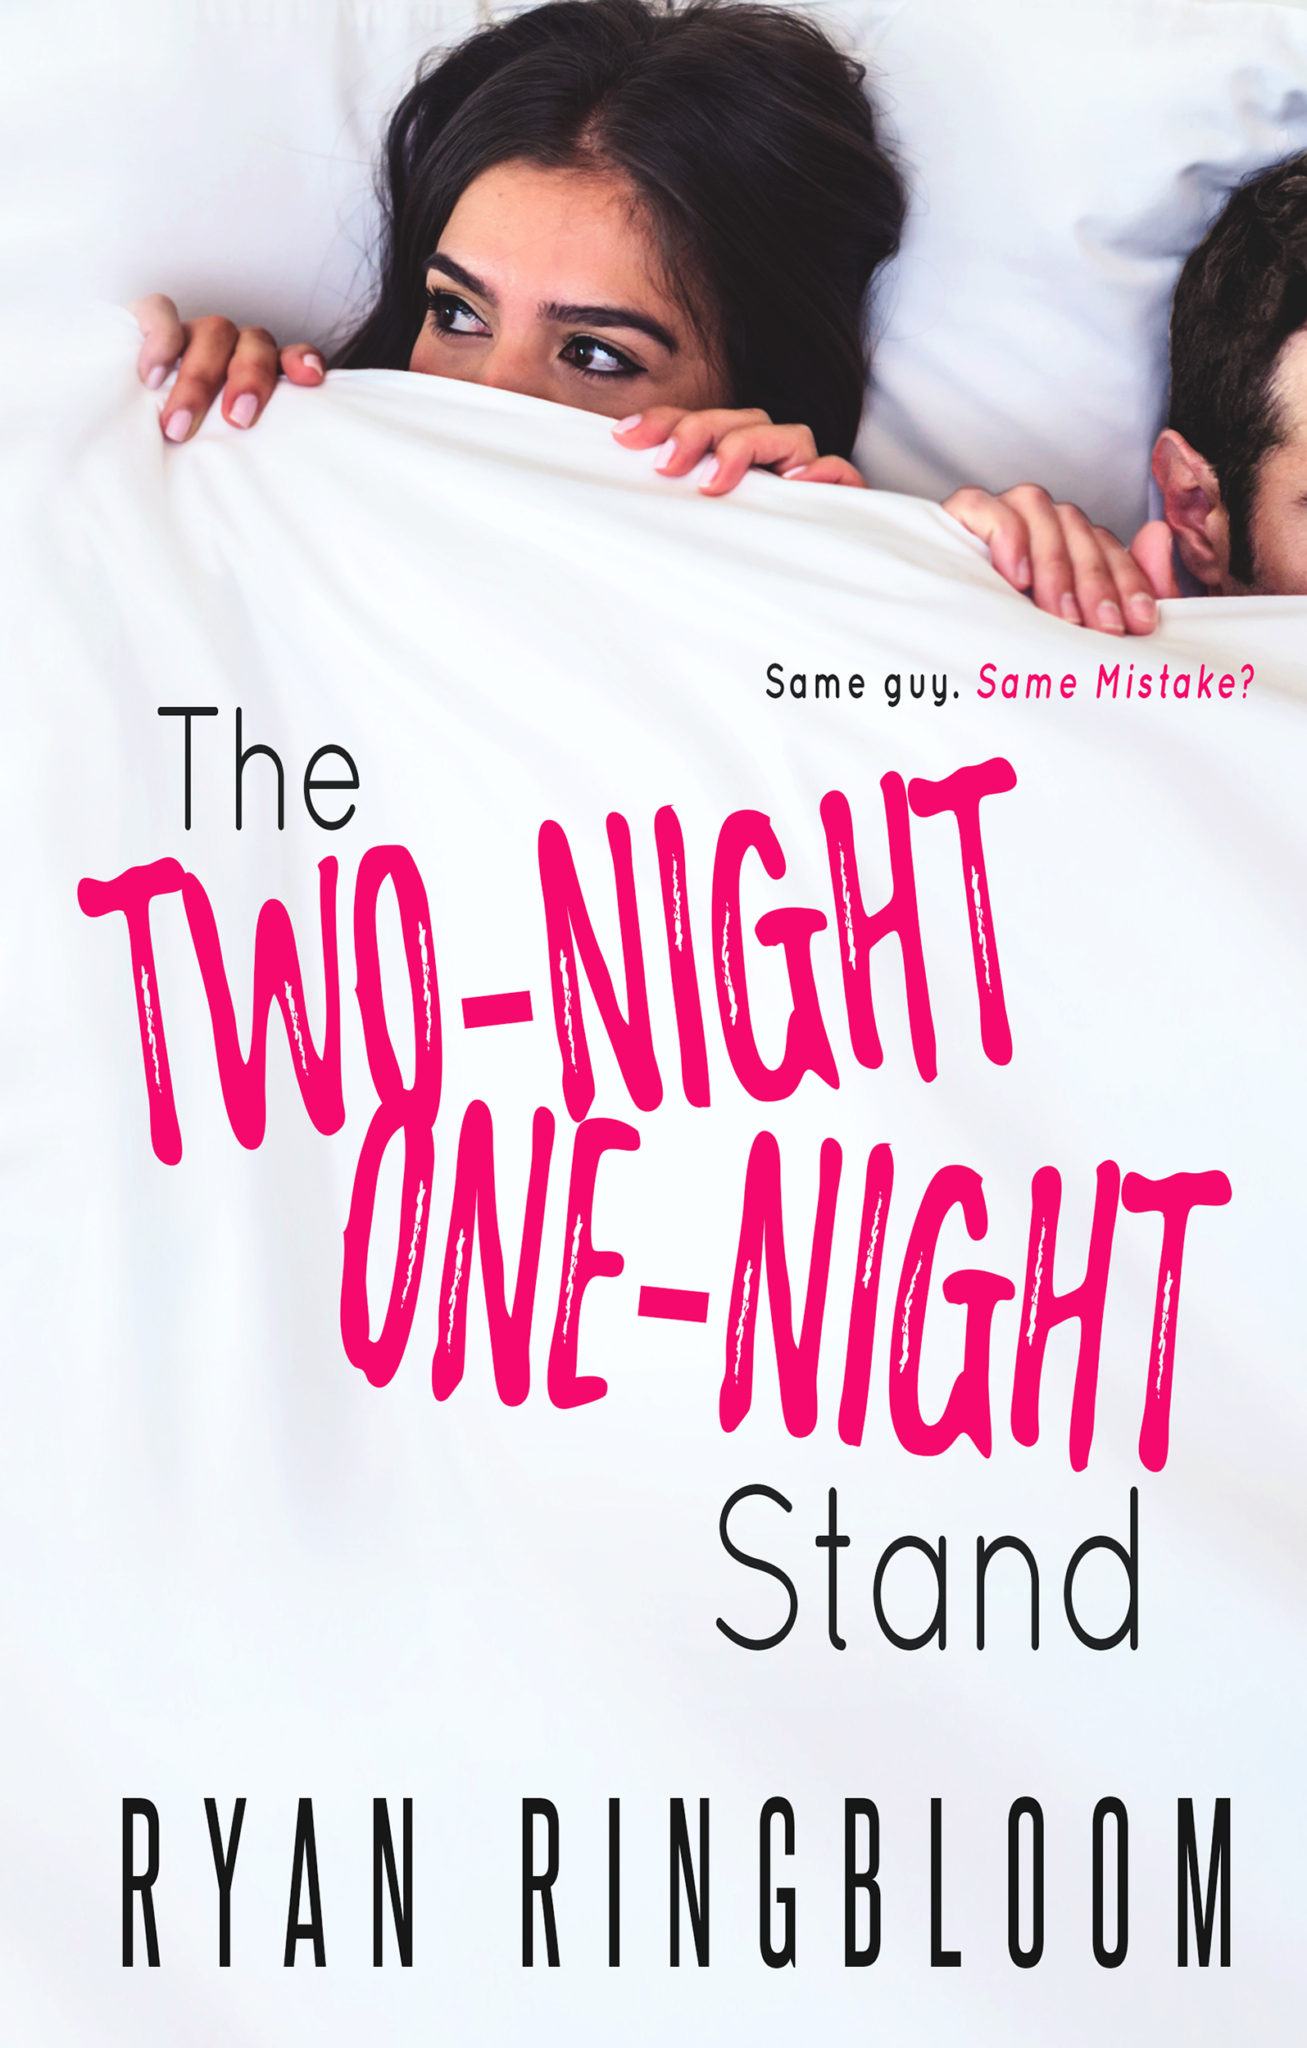 The Two-Night One-Night Stand by Ryan Ringbloom